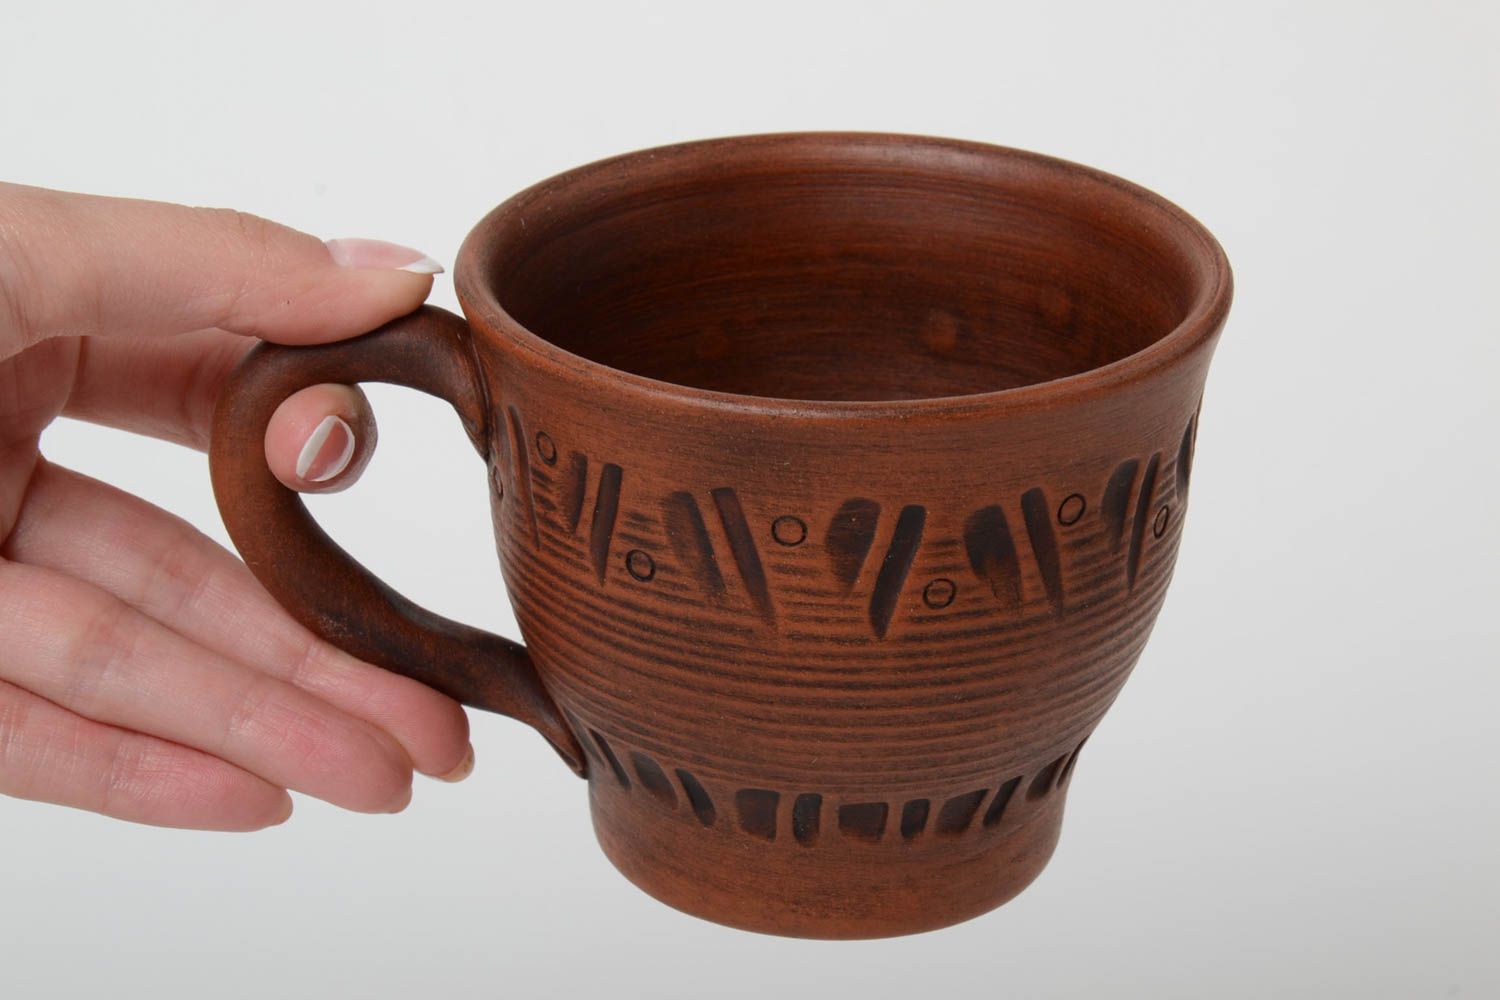 13 oz clay cup in red clay for coffee with handle and rustic pattern photo 5